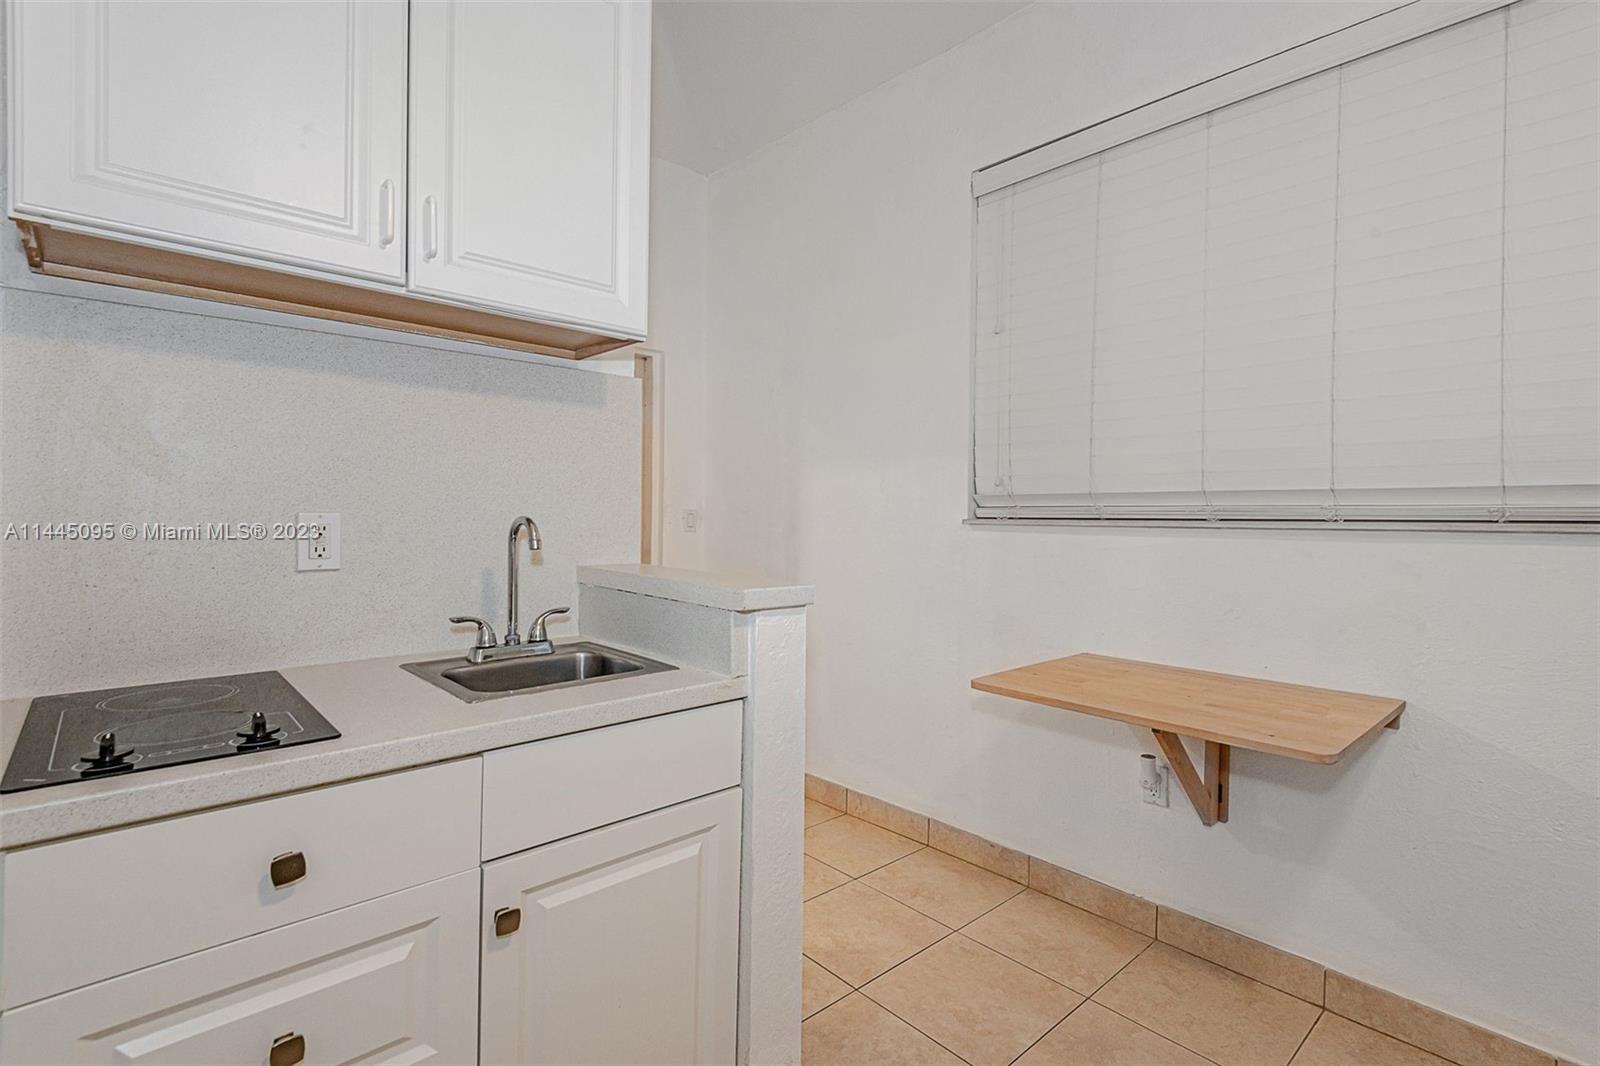 Photo 2 of Holleman Park Apt 2 in Miami - MLS A11445095